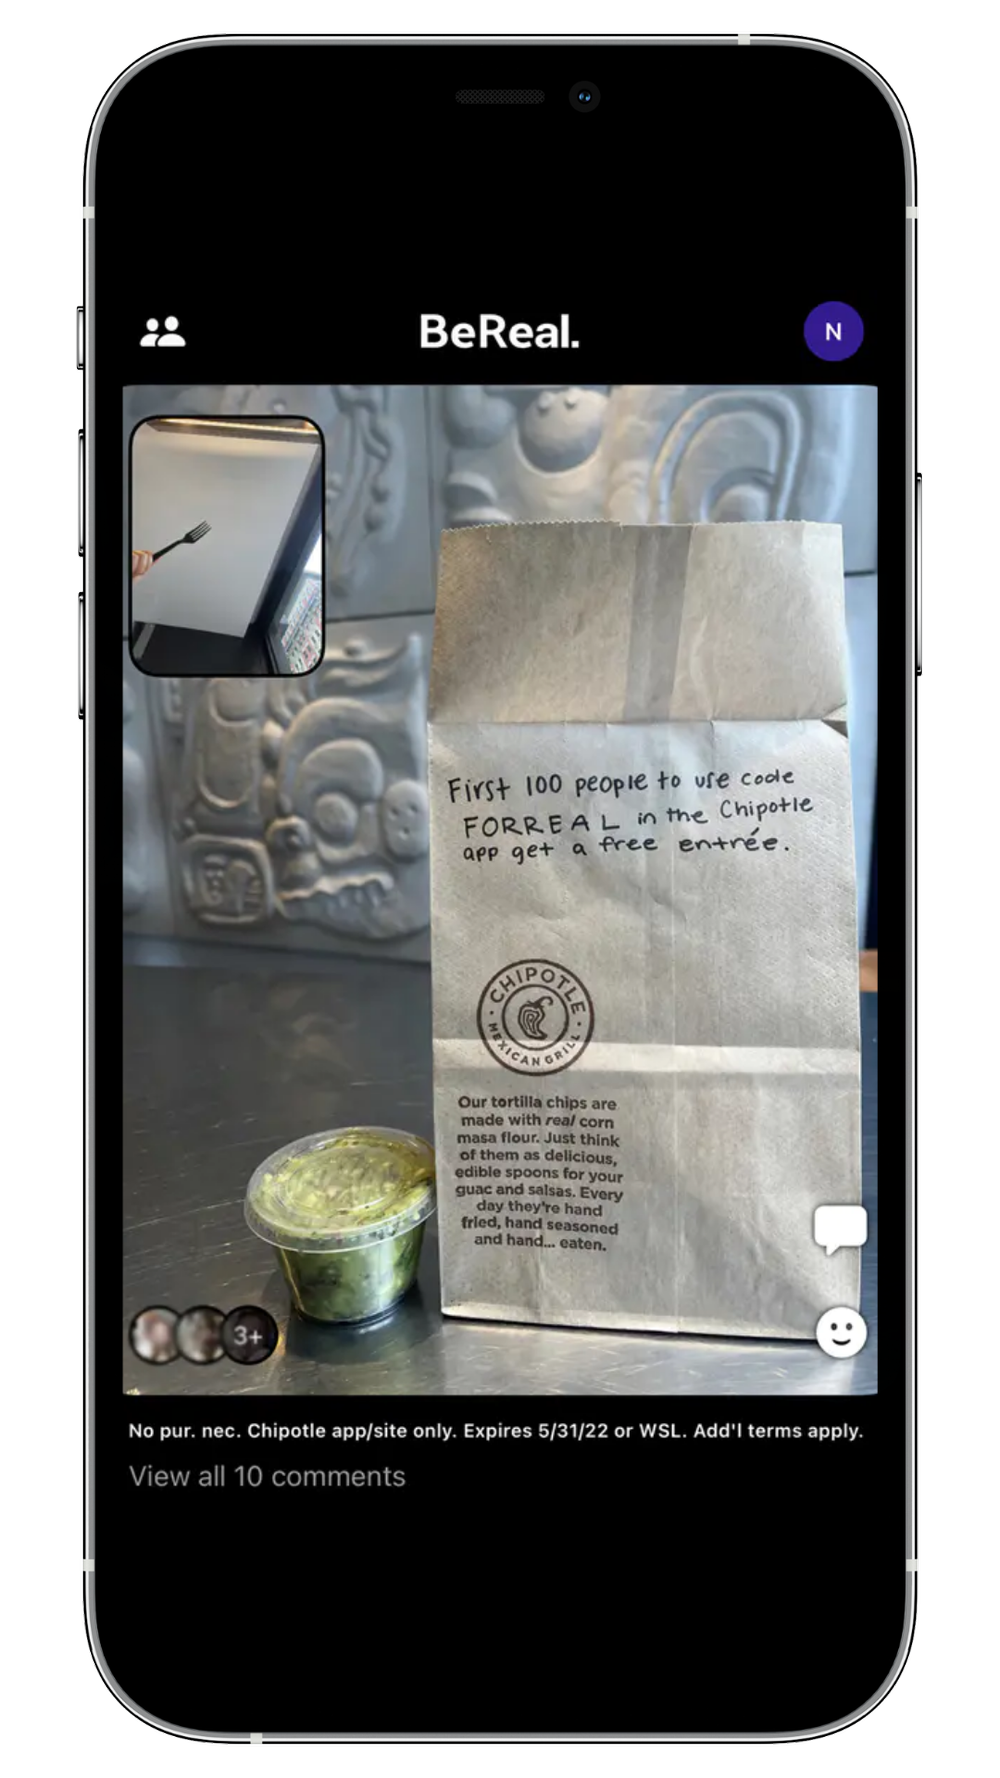 CHIPOTLE-BEREAL+(1)